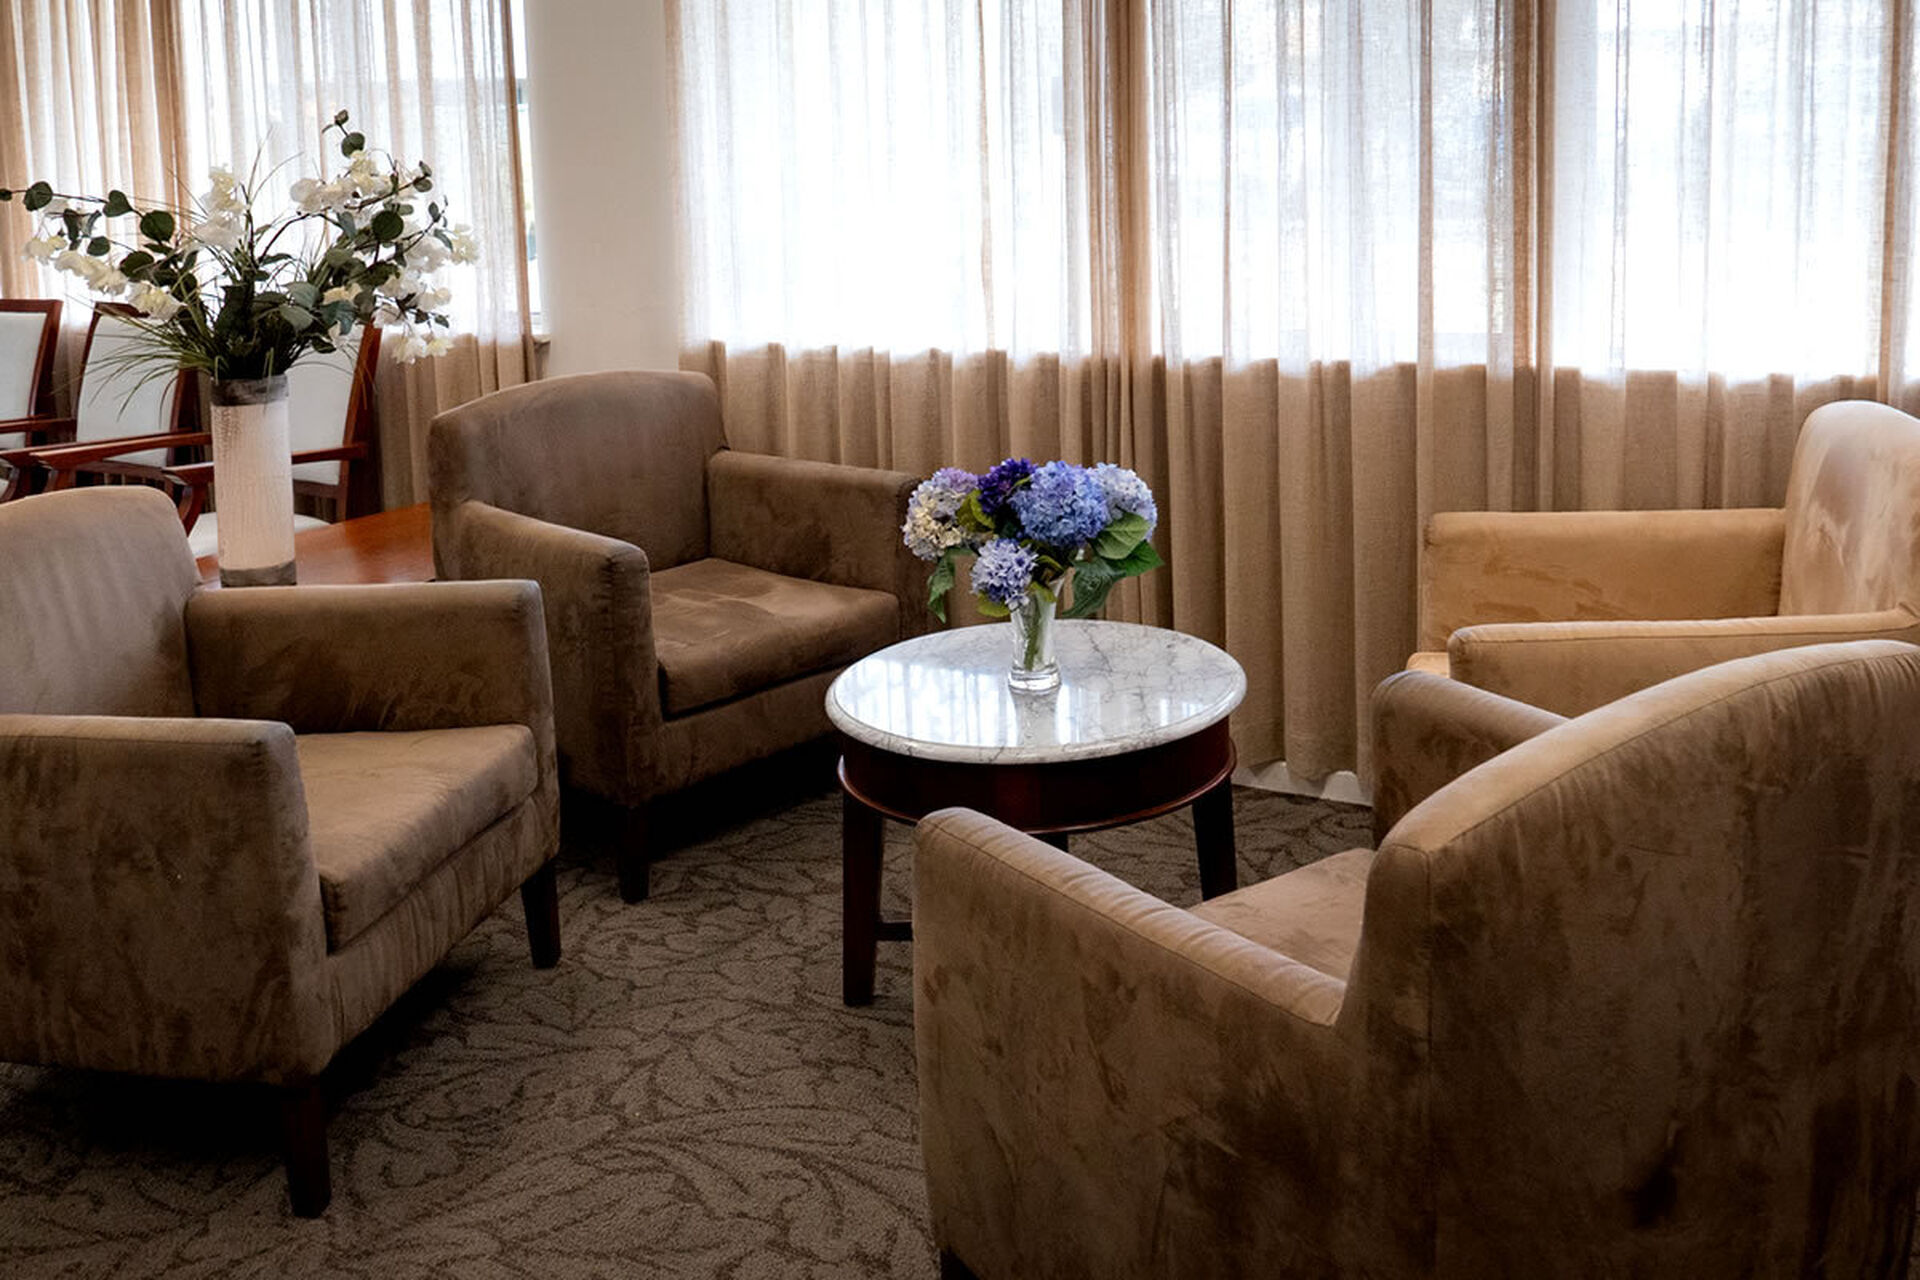 spacious sitting area for nursing home residents at baptistcare balladong gardens aged care home in york wa